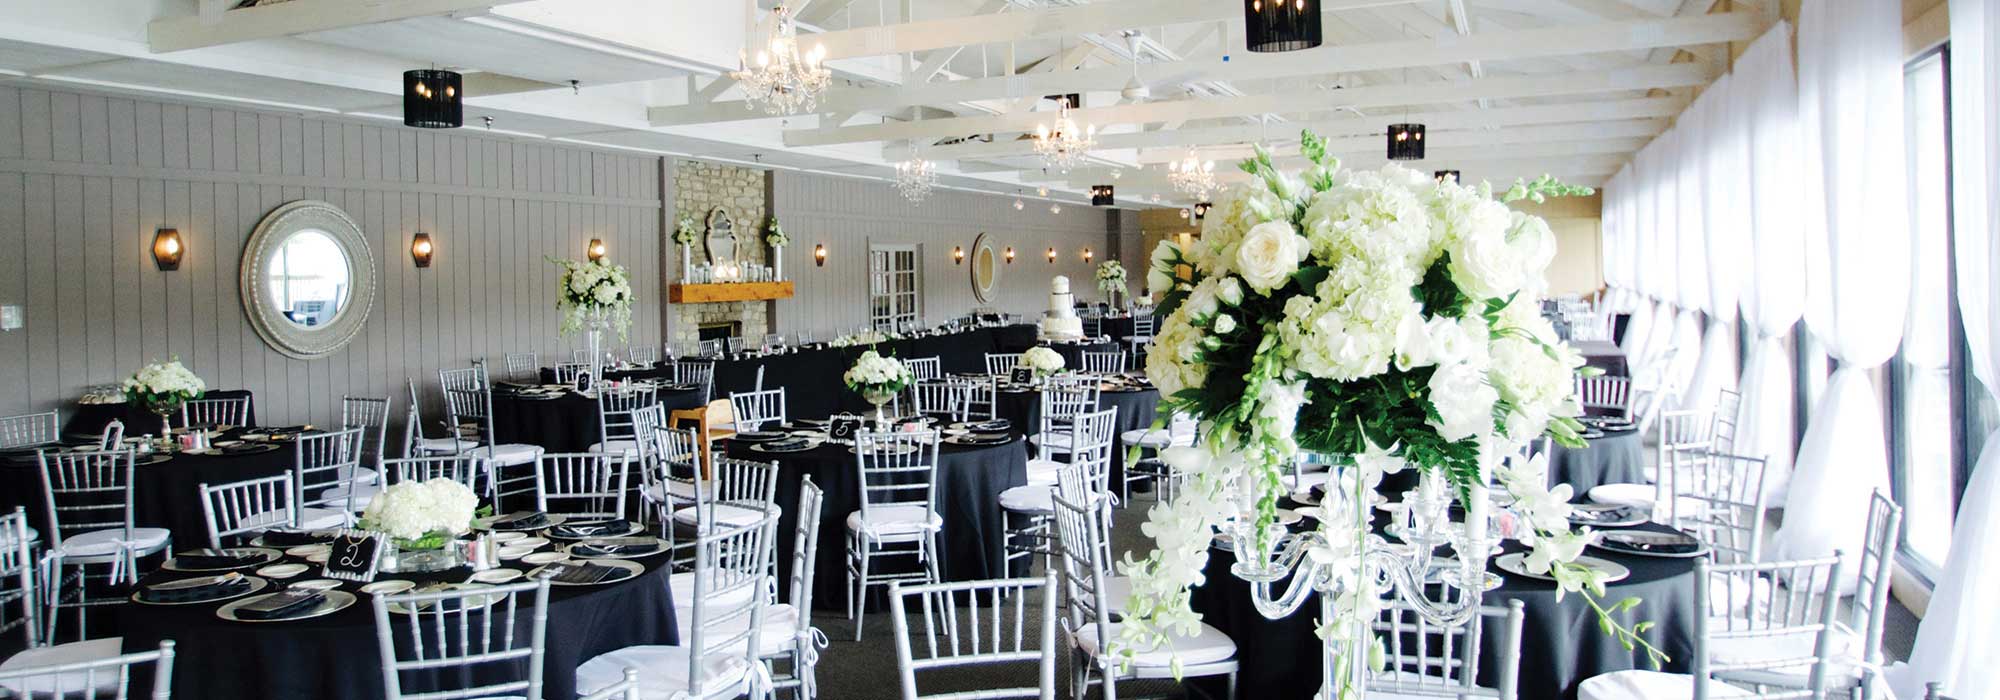 The Lodge at The Willows decorated in white for a formal wedding reception